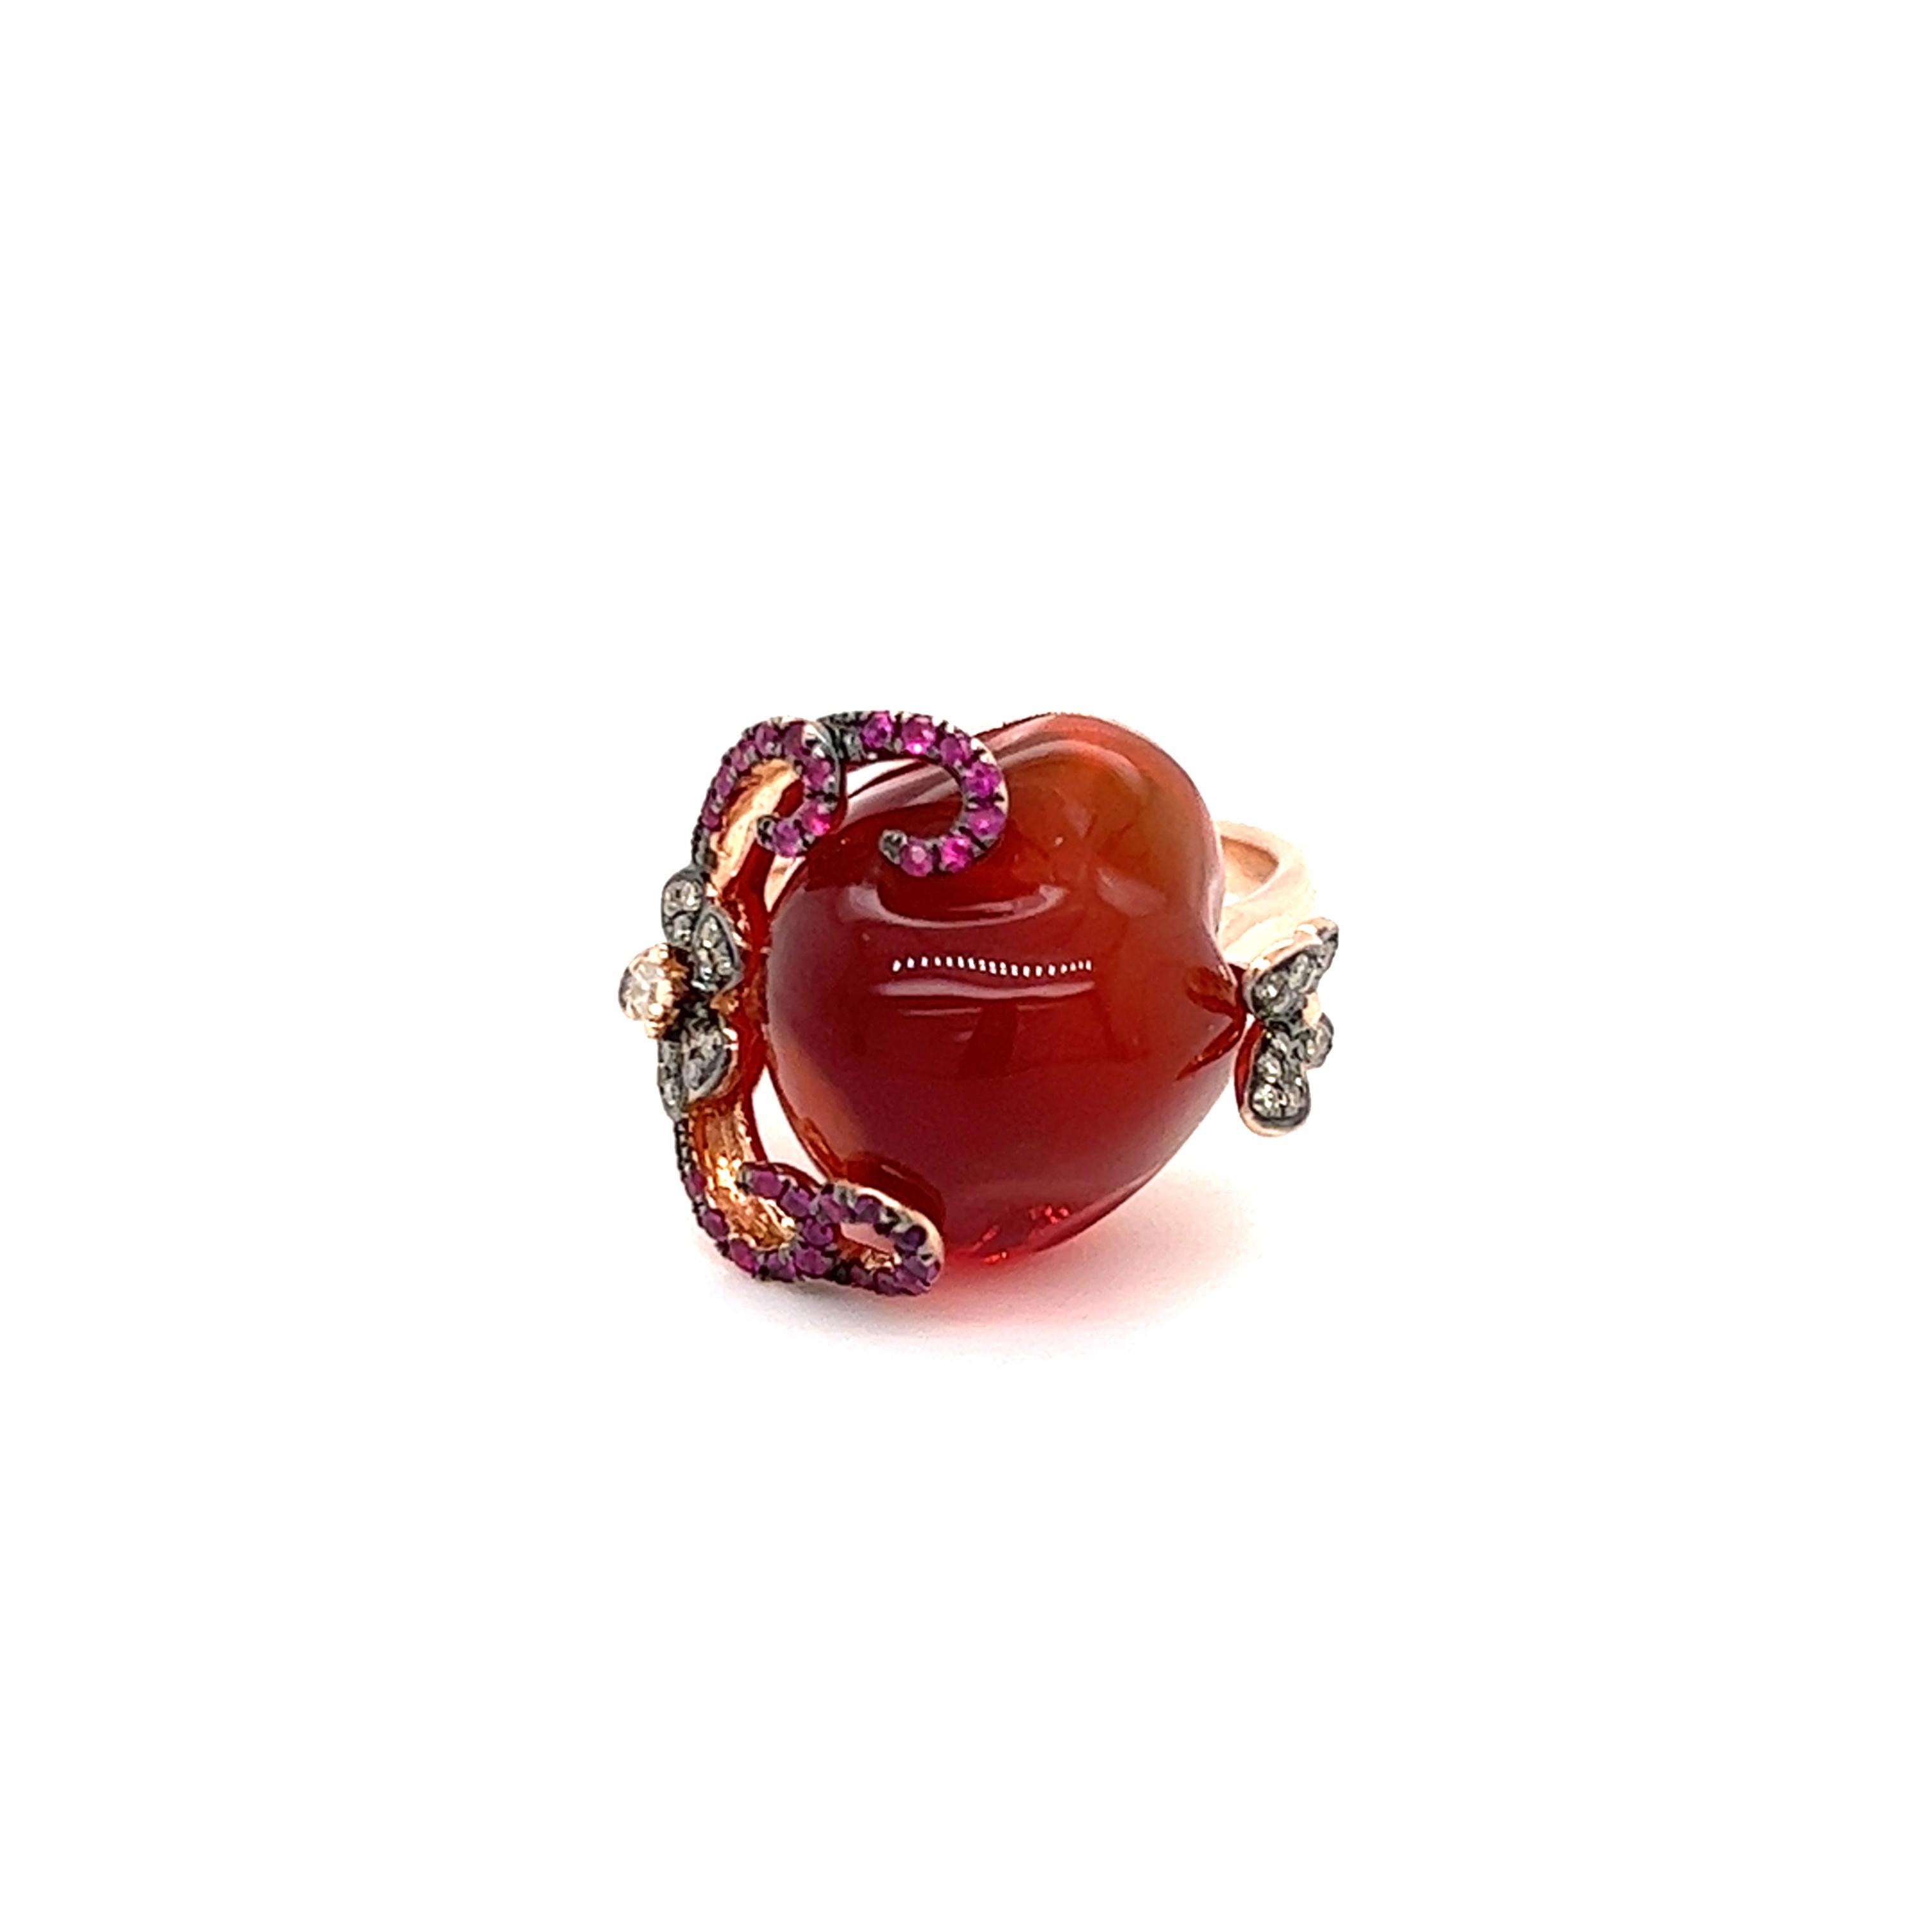 Uncut 12.24 Carat Mexican Fire Opal with Diamonds and Rubies in 14K Rose Gold